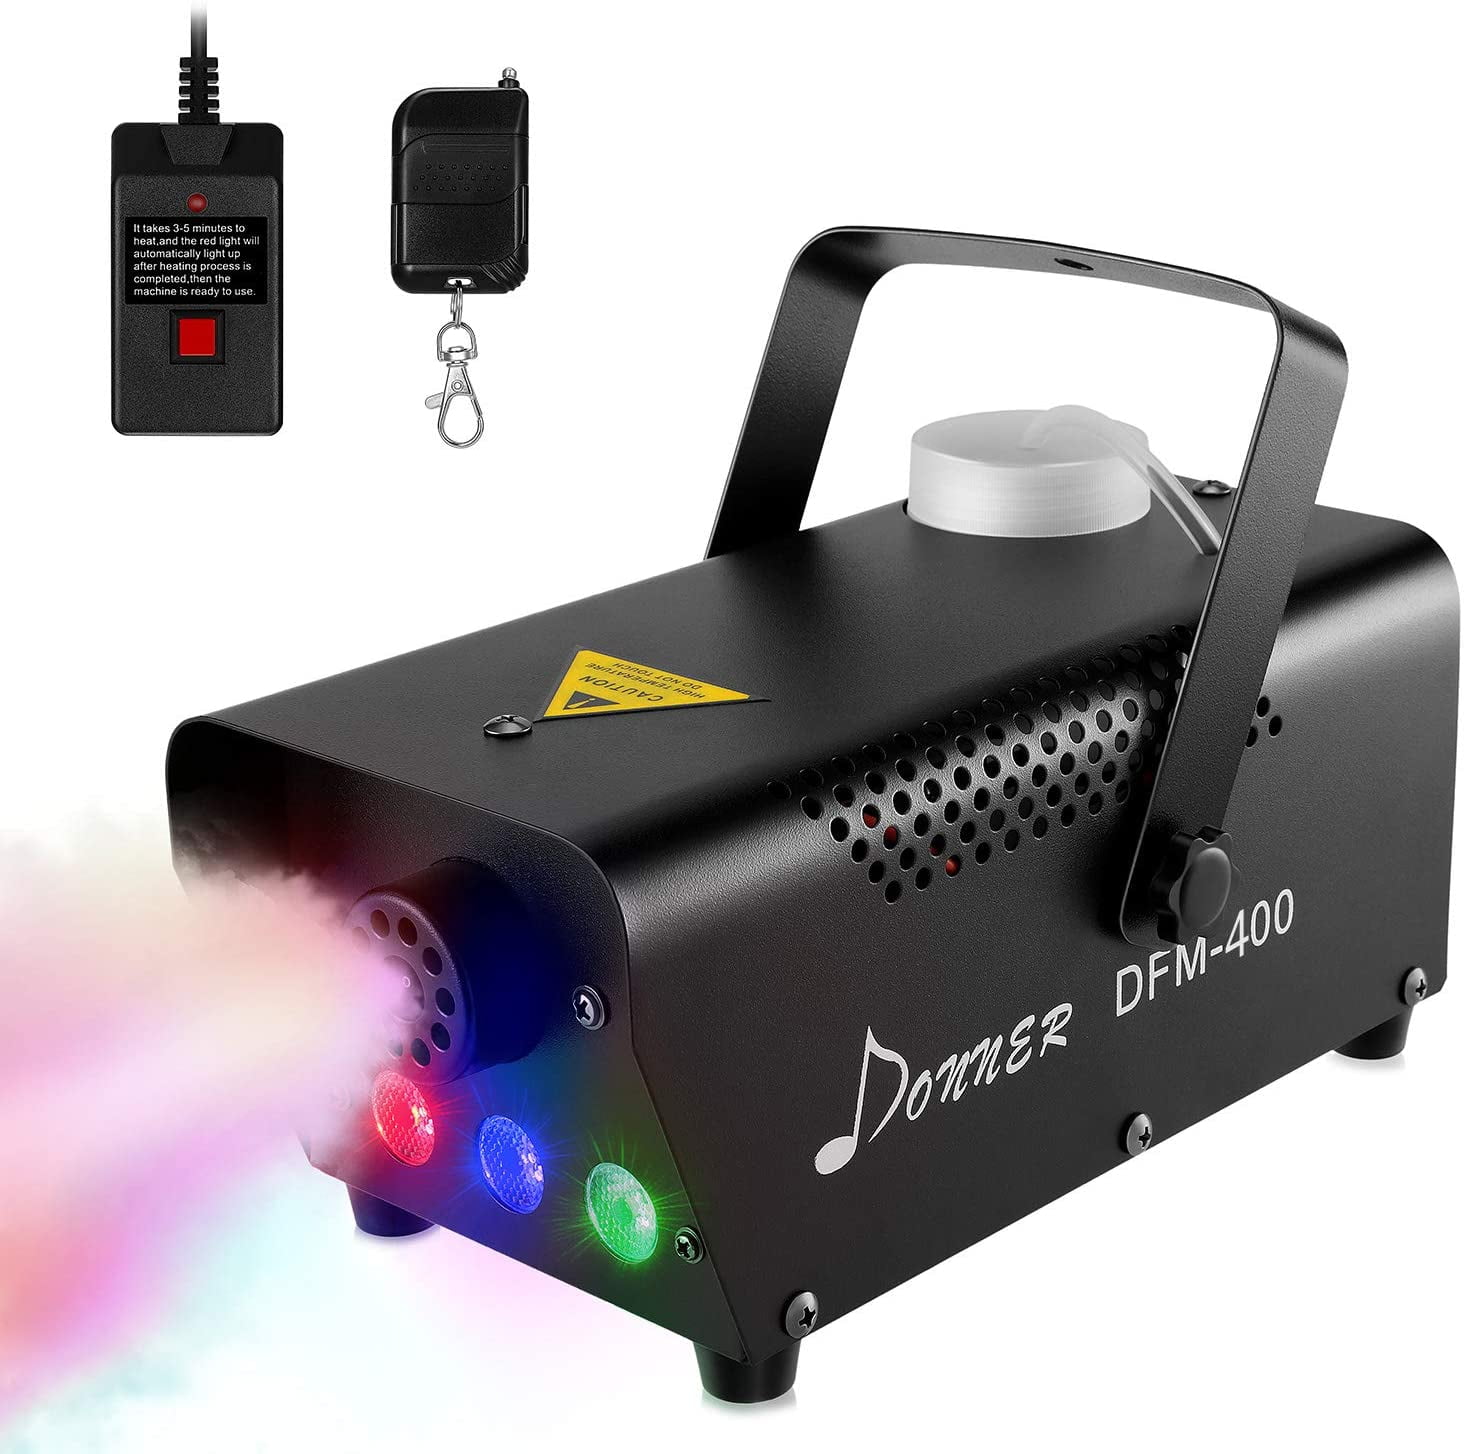 Red,Green,Blue DJ LED Smoke Machine with Fuse Protection with Wireless and Wired Remote Control for Holidays Parties Weddings Christmas Halloween JDR Fog Machine with Controllable lights 